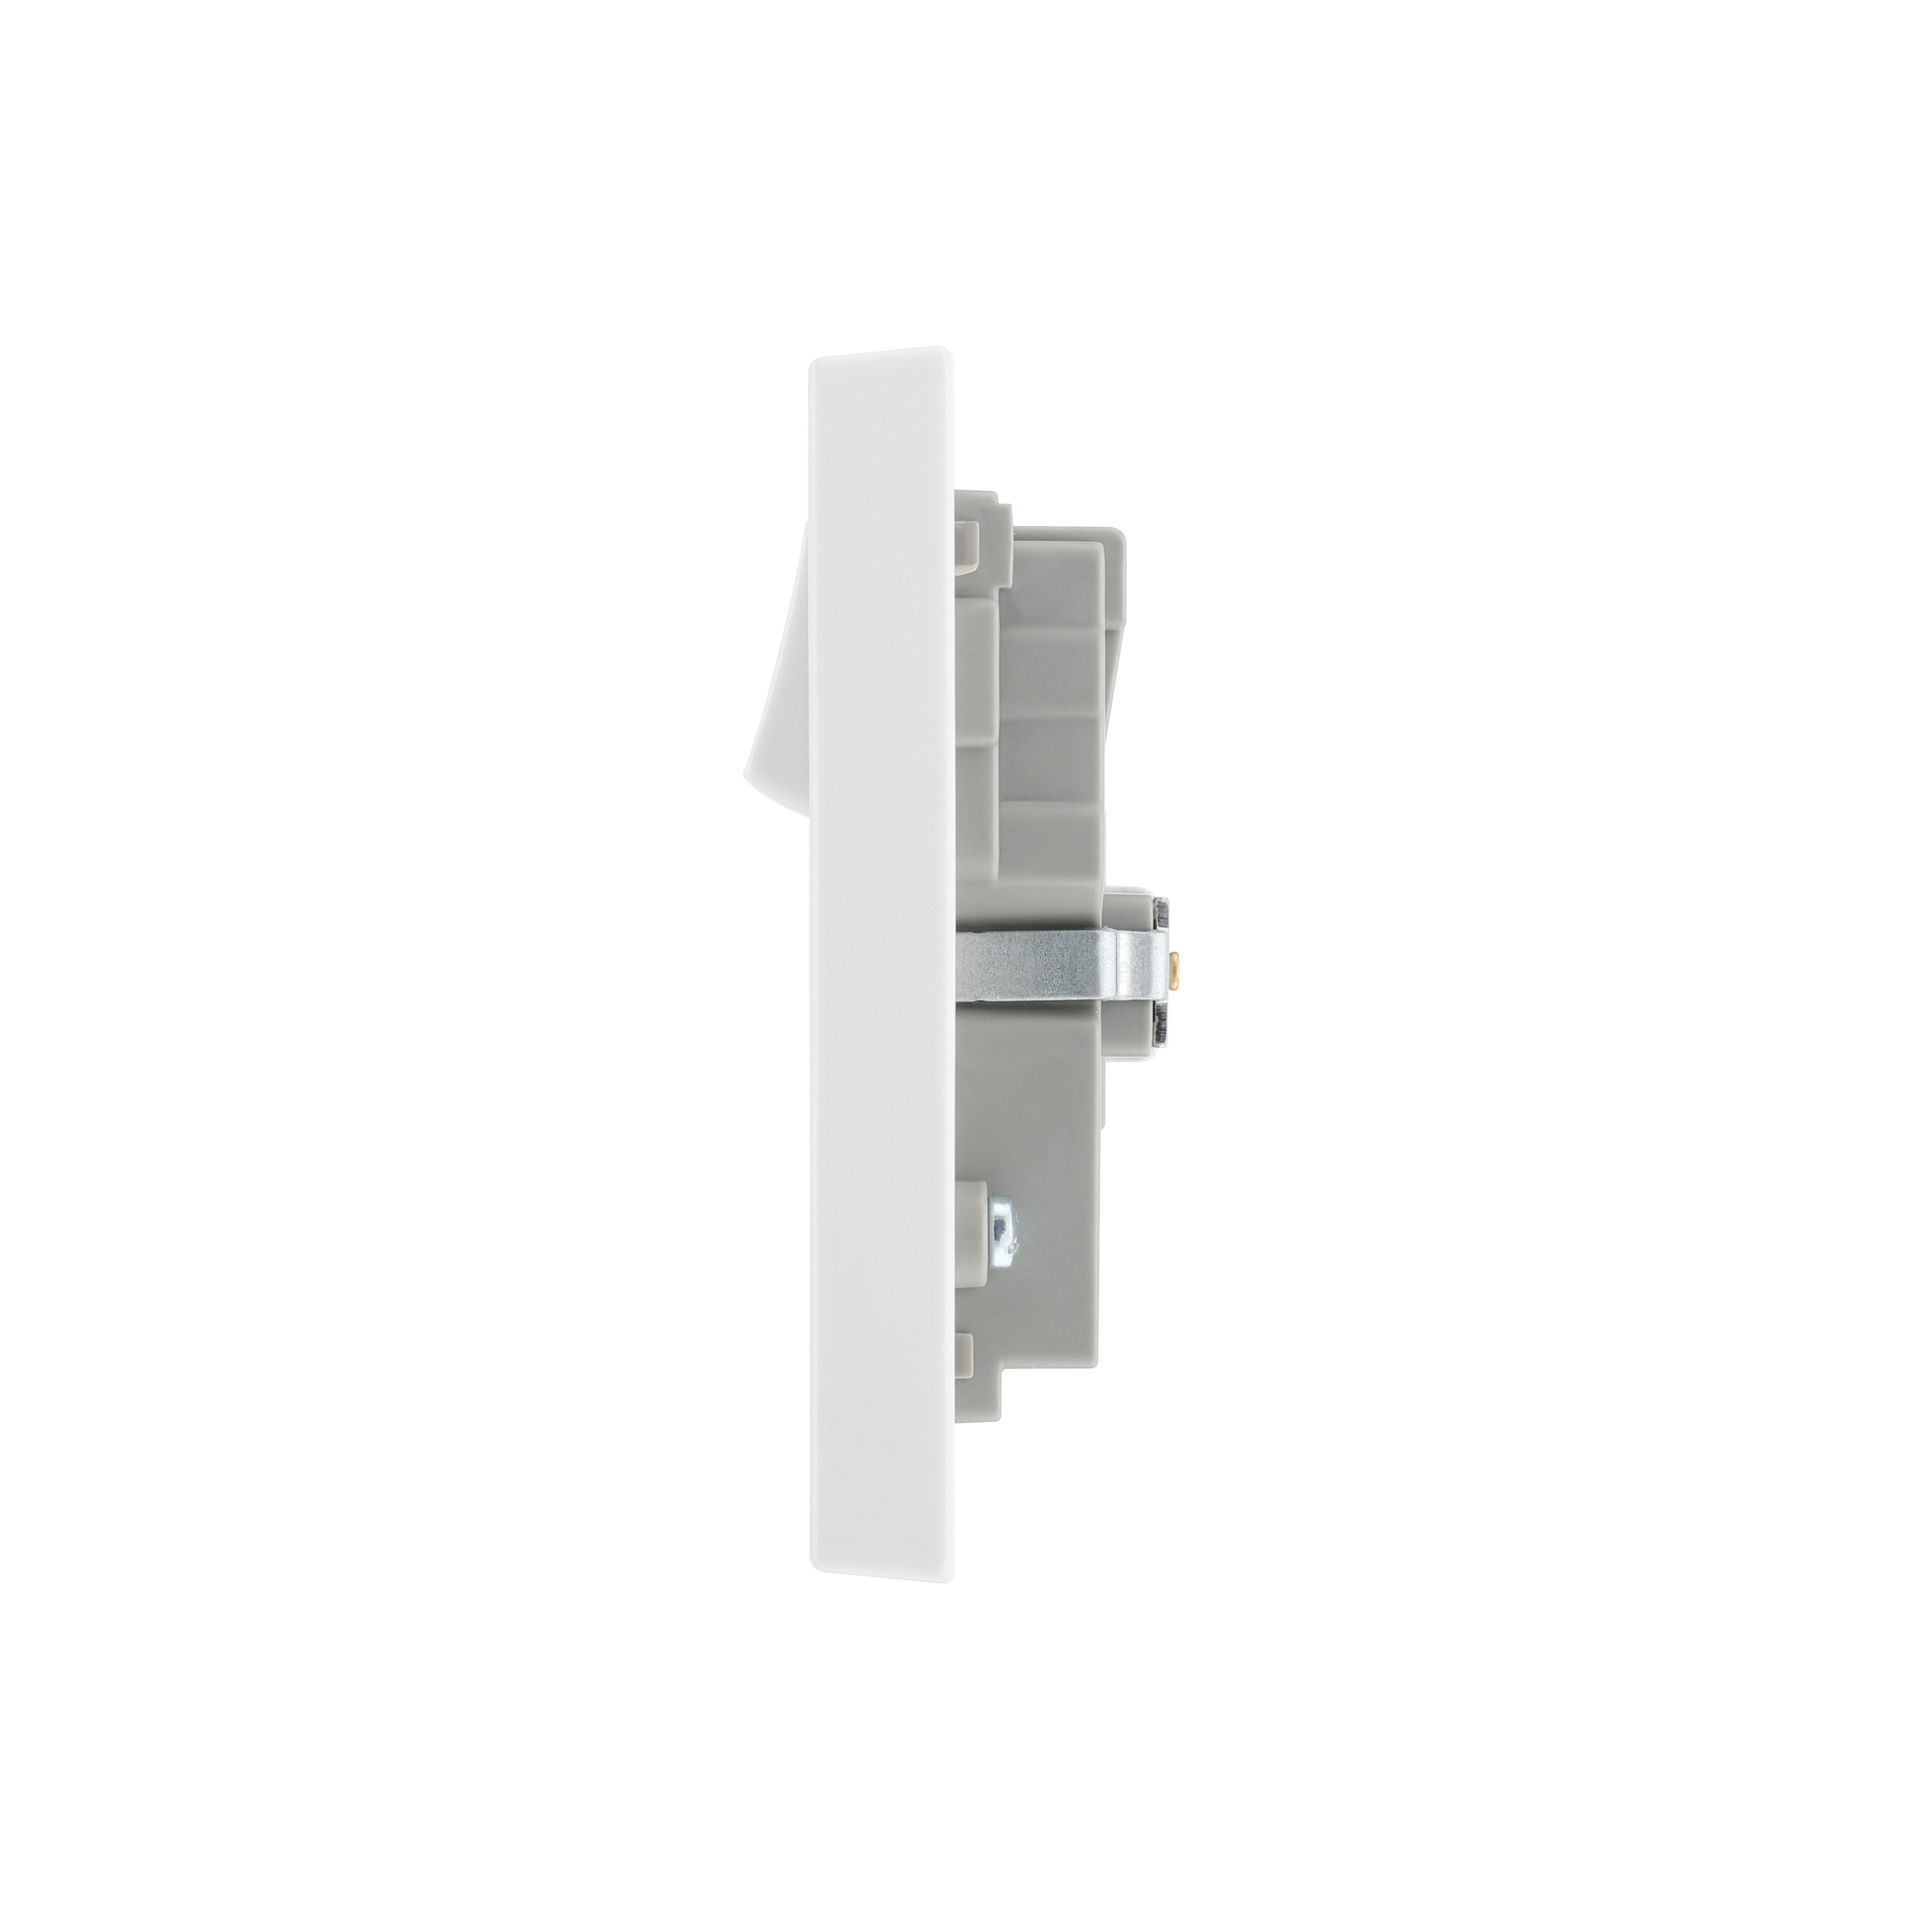 BG Double 13A Switched Gloss White Socket with USB x2 3.1A